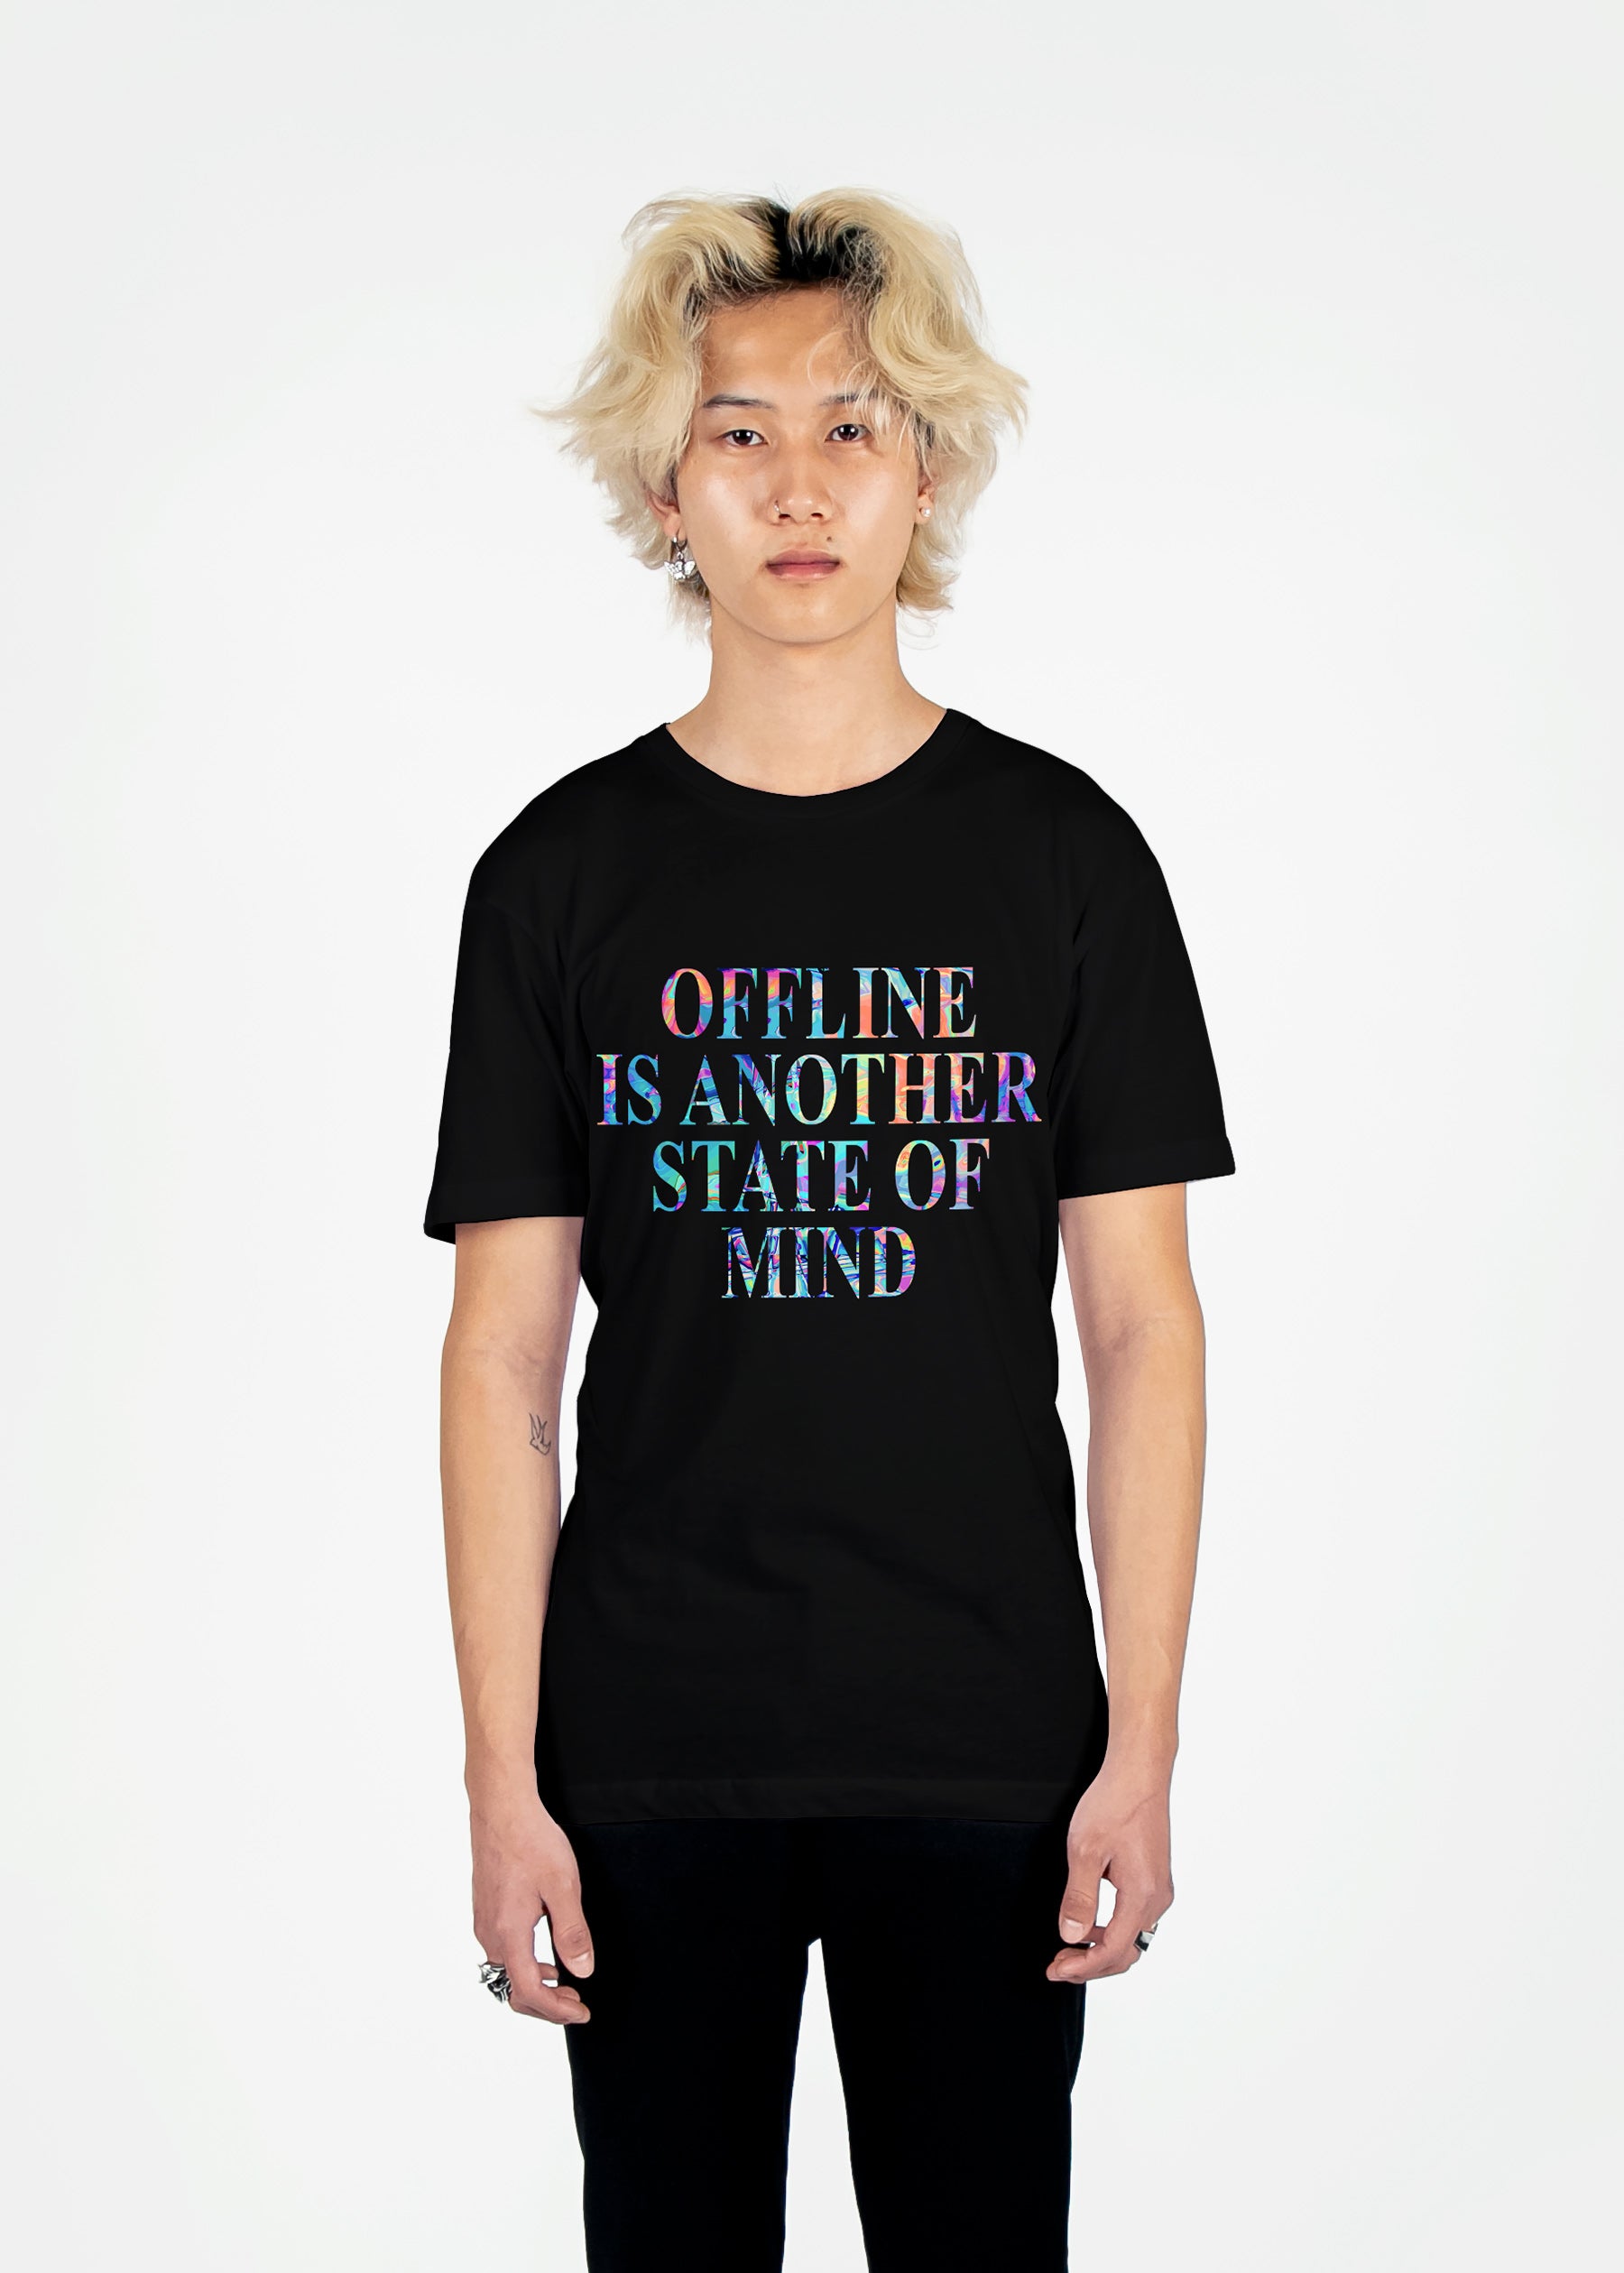 Another State Of Mind Tee